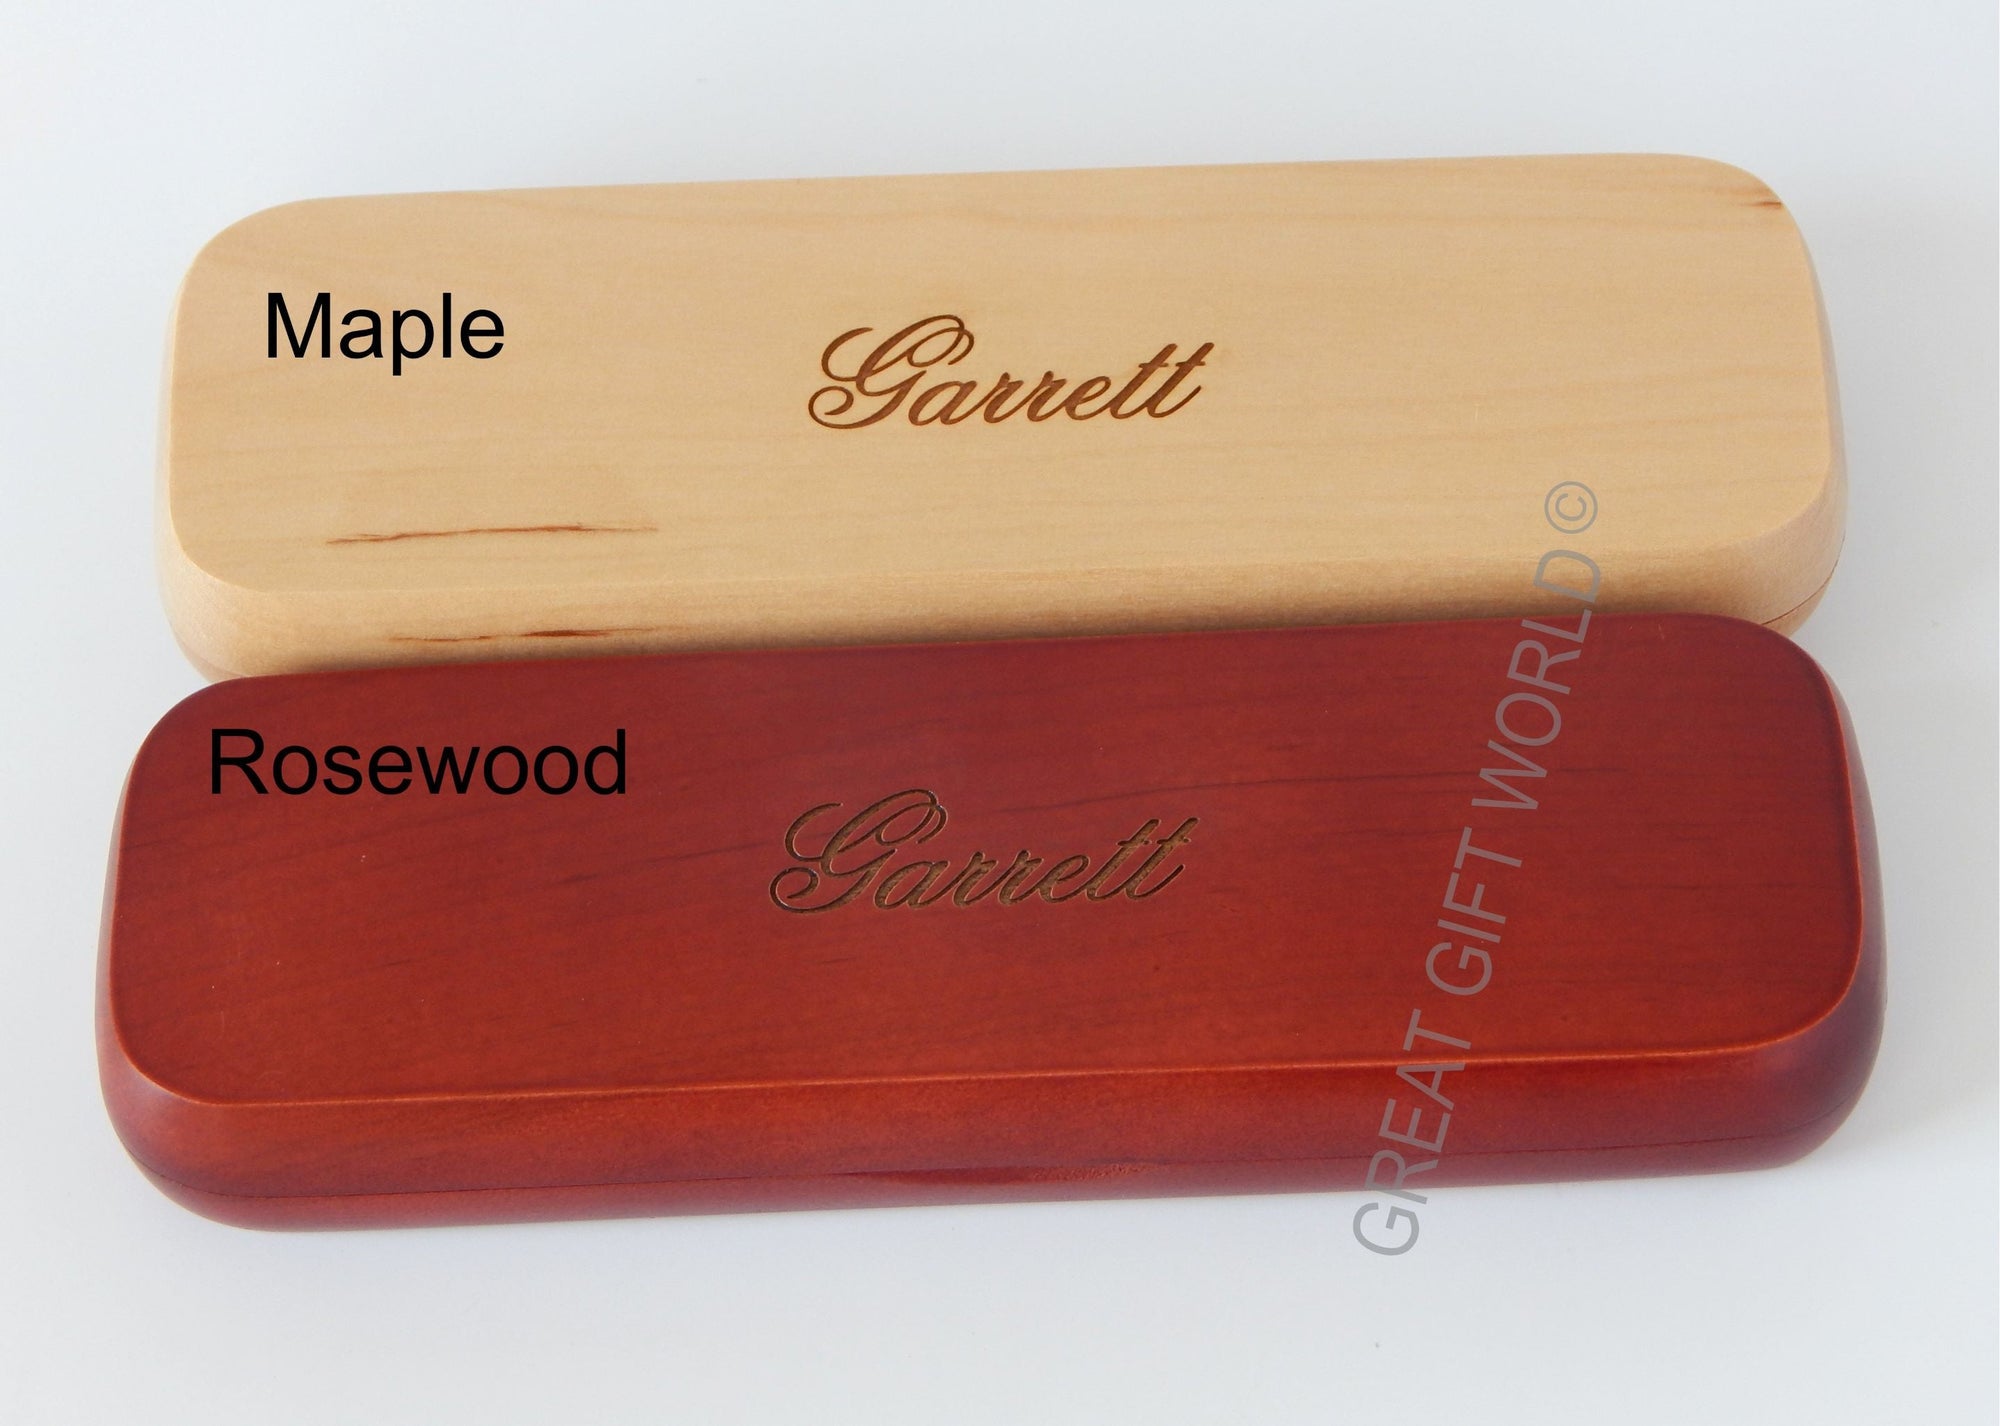 Christian Gifts for Dad | Personalized Wooden Pen | Religious Gift